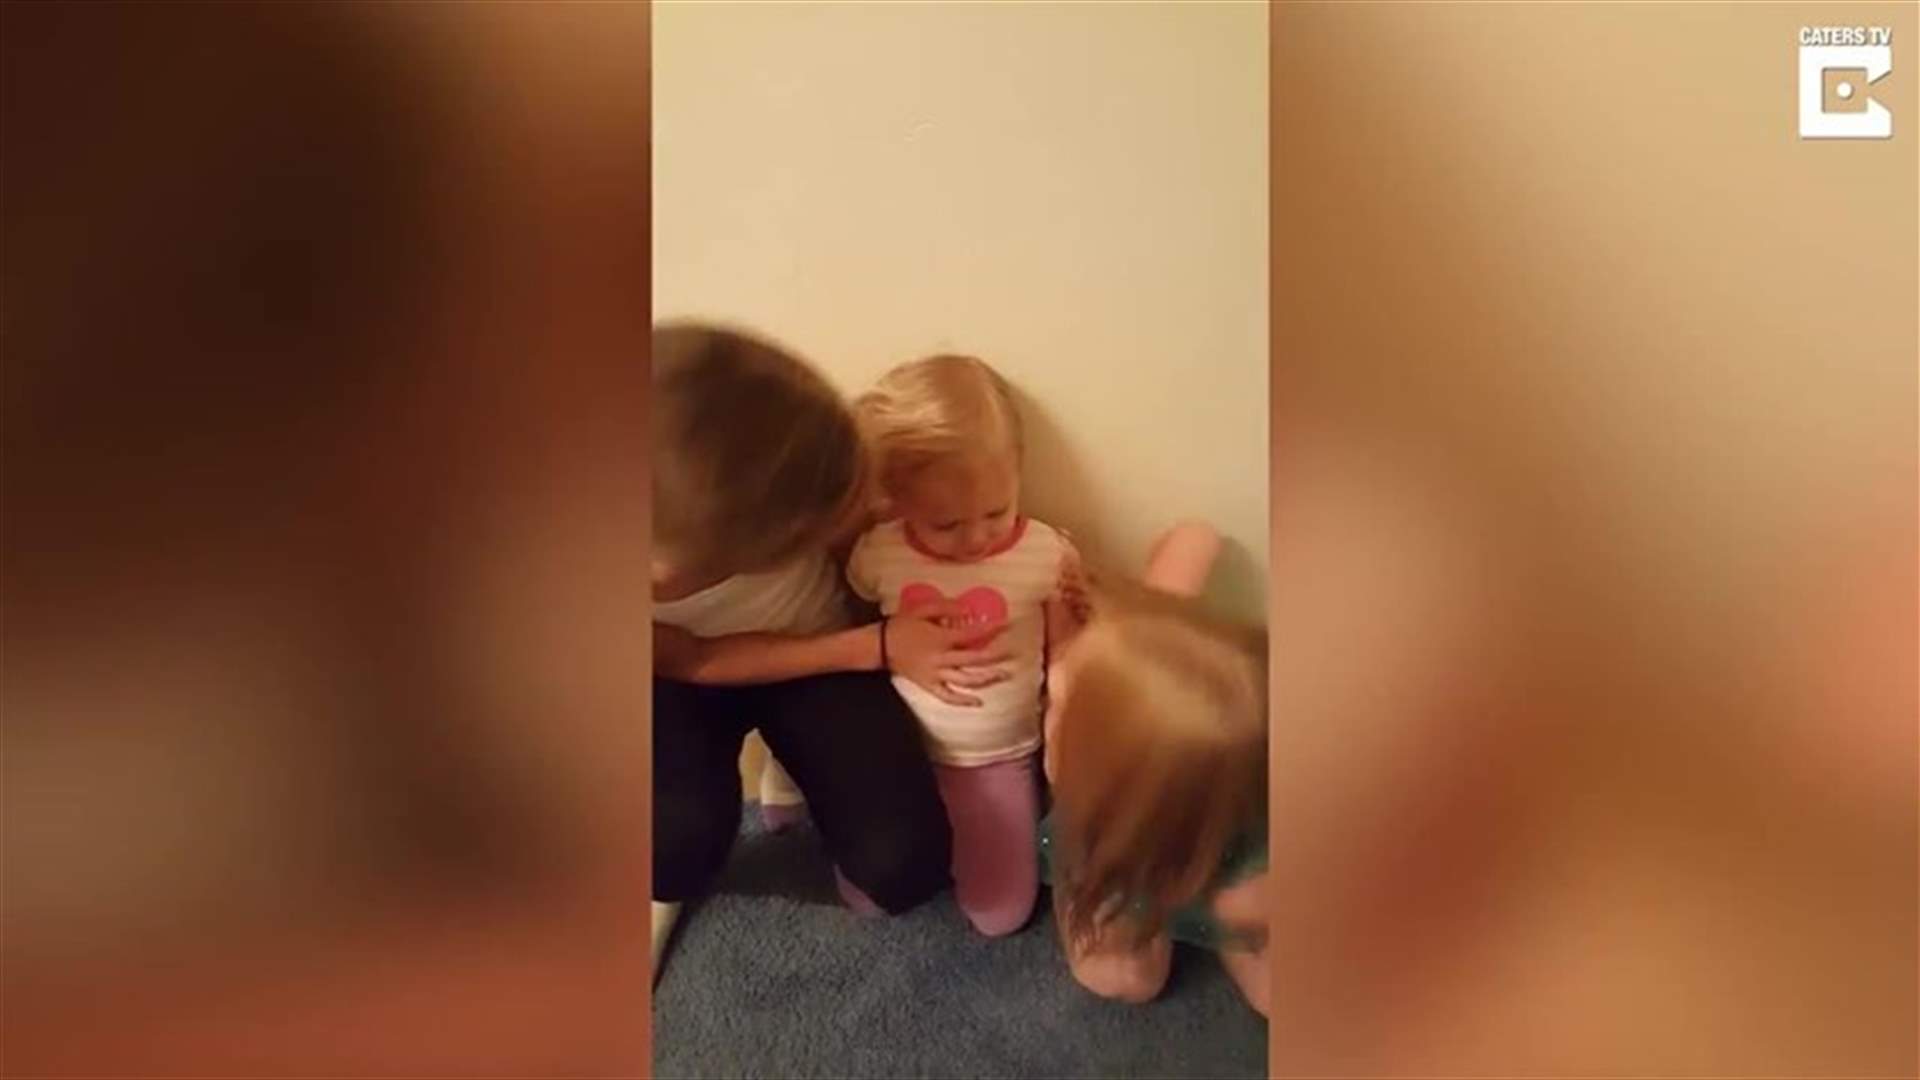 [VIDEO] Toddler’s Priceless Reaction Every Time She Hears Celine Dion’s “My Heart Will Go On”